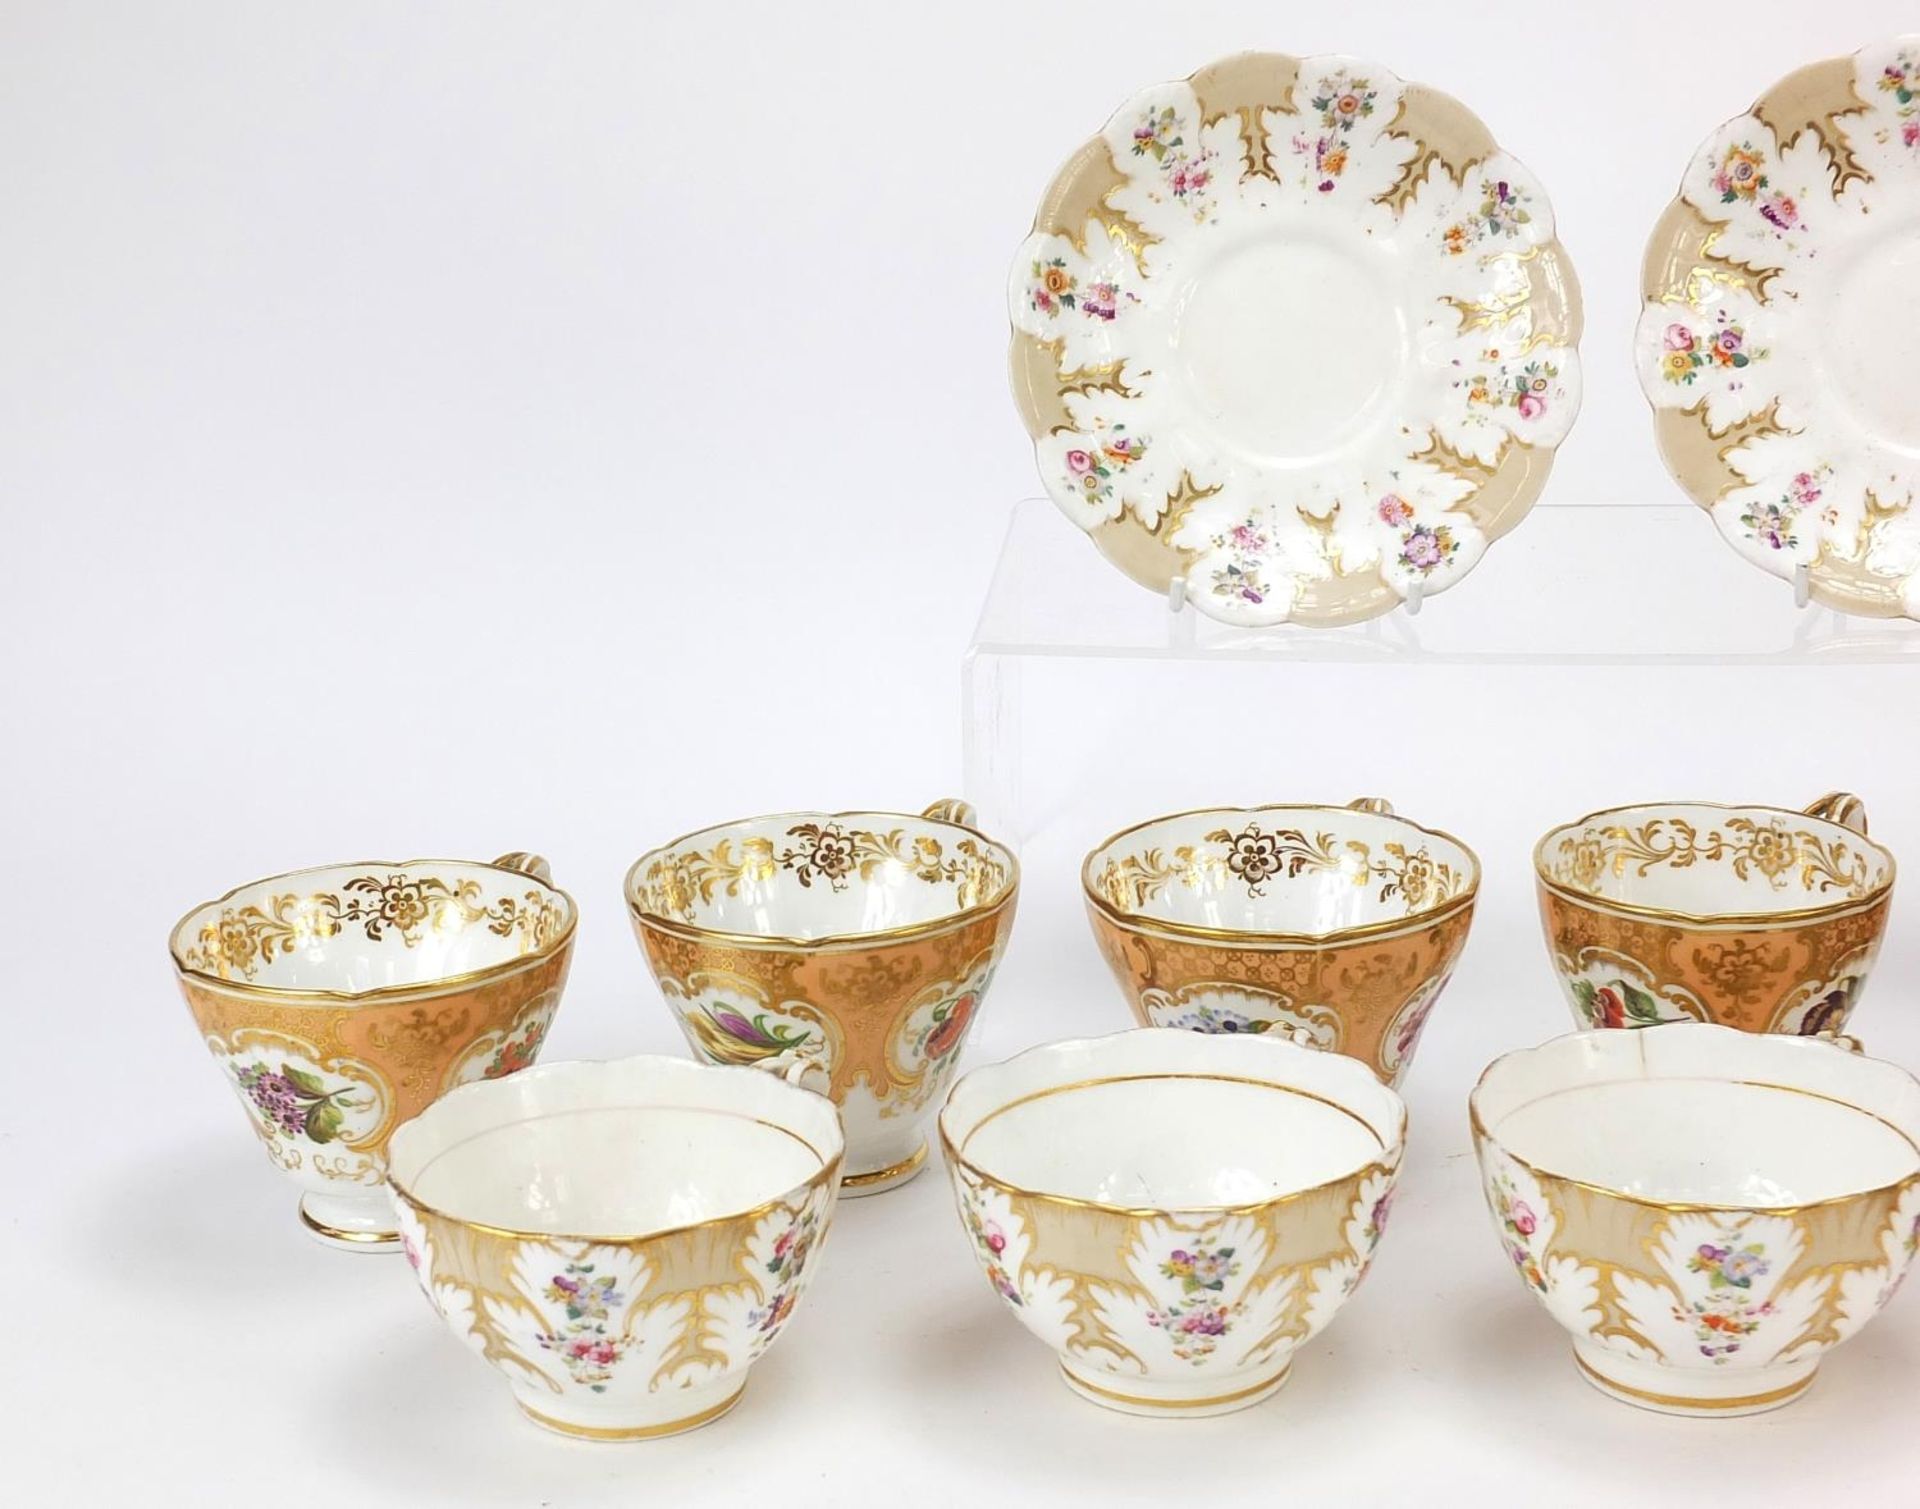 Early 19th century English teaware hand painted with flowers, patter number 174 and 2253, the - Bild 2 aus 7